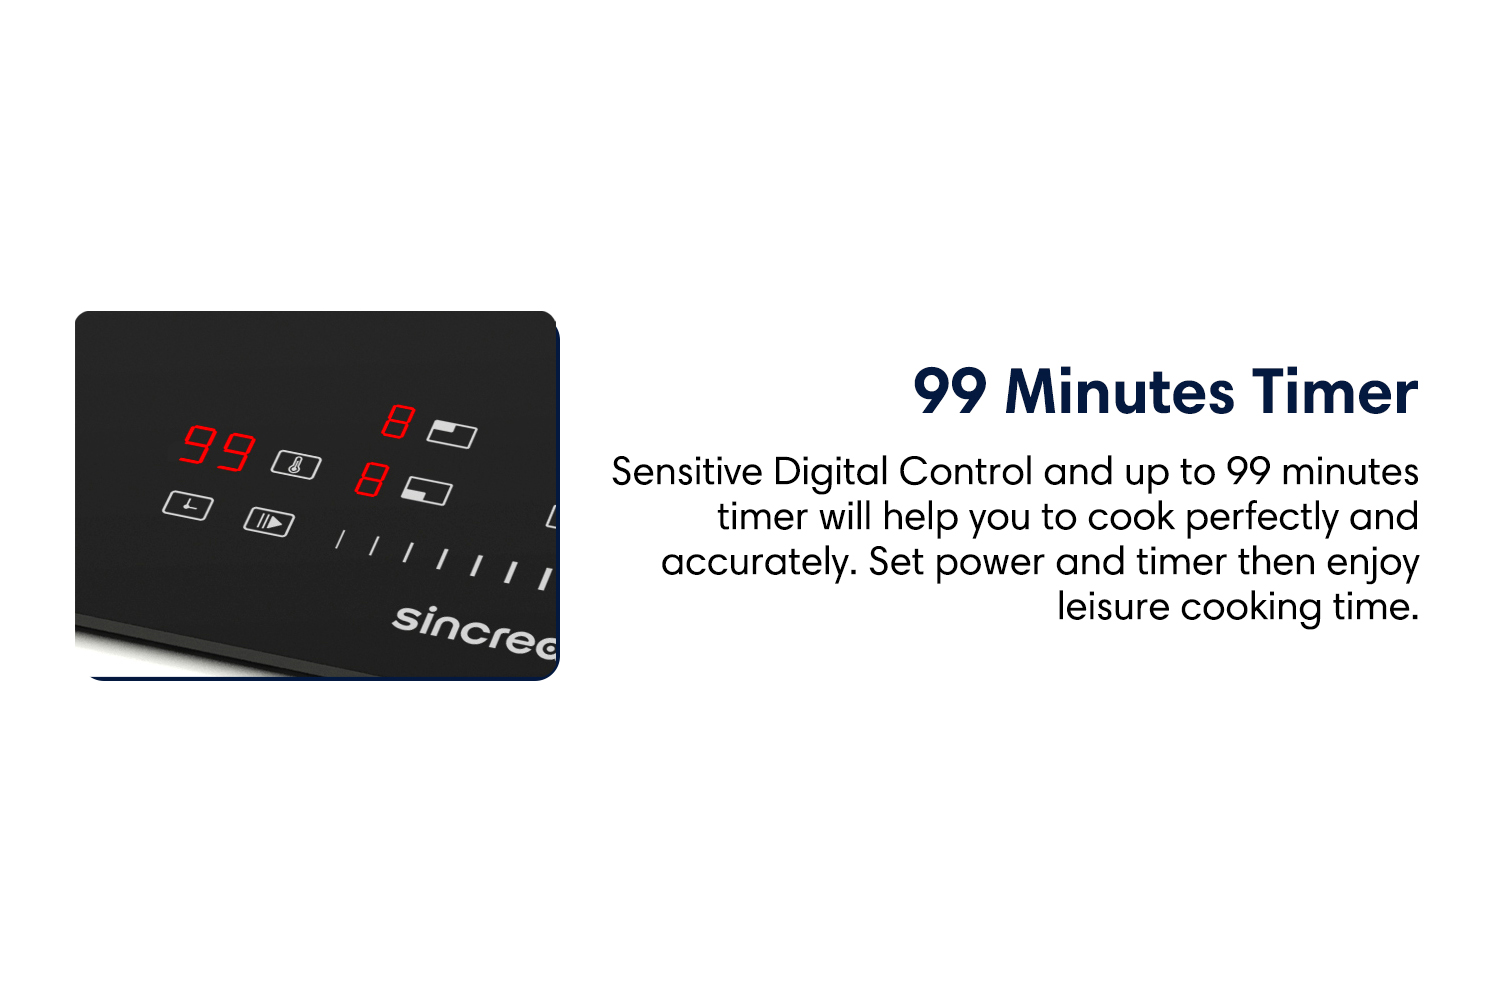 99 Minutes timer Sensitive Digital Control and up to 99 minutes timer will help you to cook perfectly and accurately. Set power and timer then enjoy leisure cooking time.